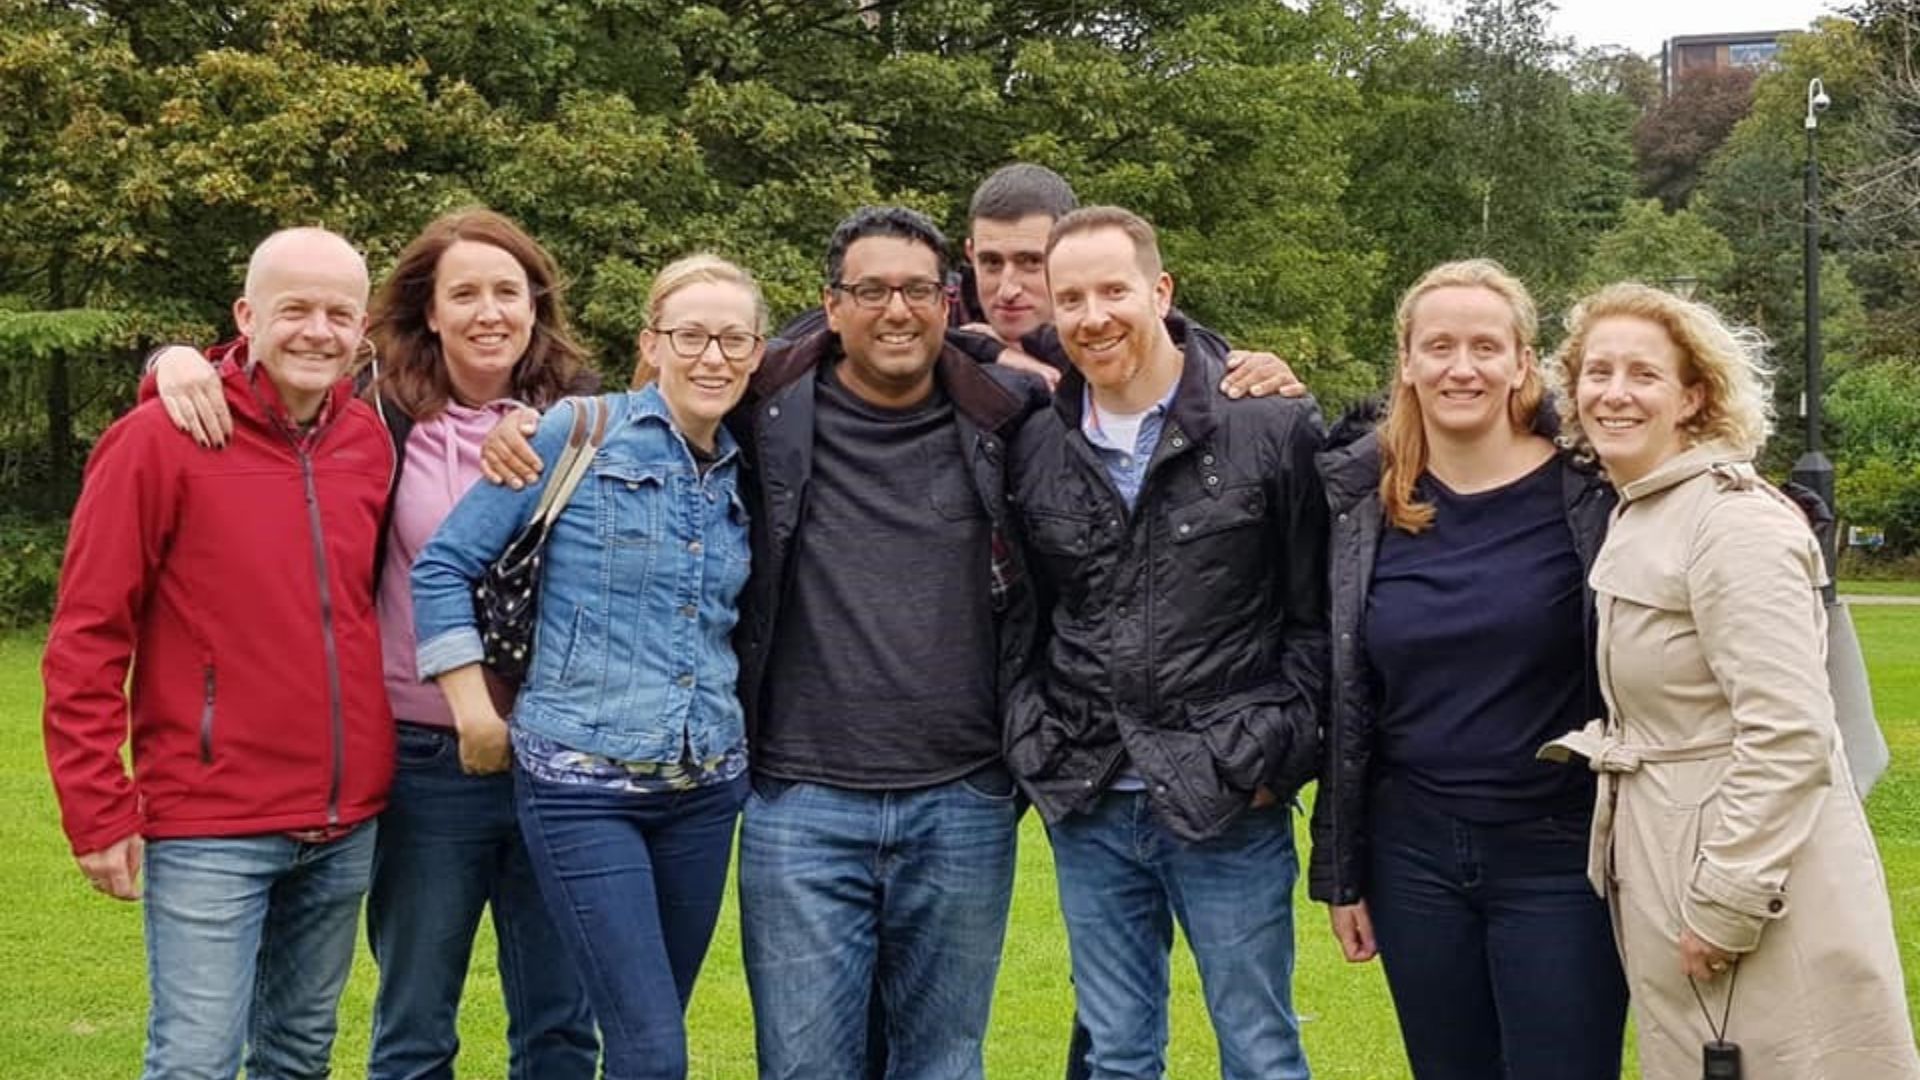 Jay (centre) and friends on the Vale during their 25th anniversary reunion in 2019 (L-R - Michael, Sarah, Catherine, Jay, JJ, Rupert, Elaine and Emma).